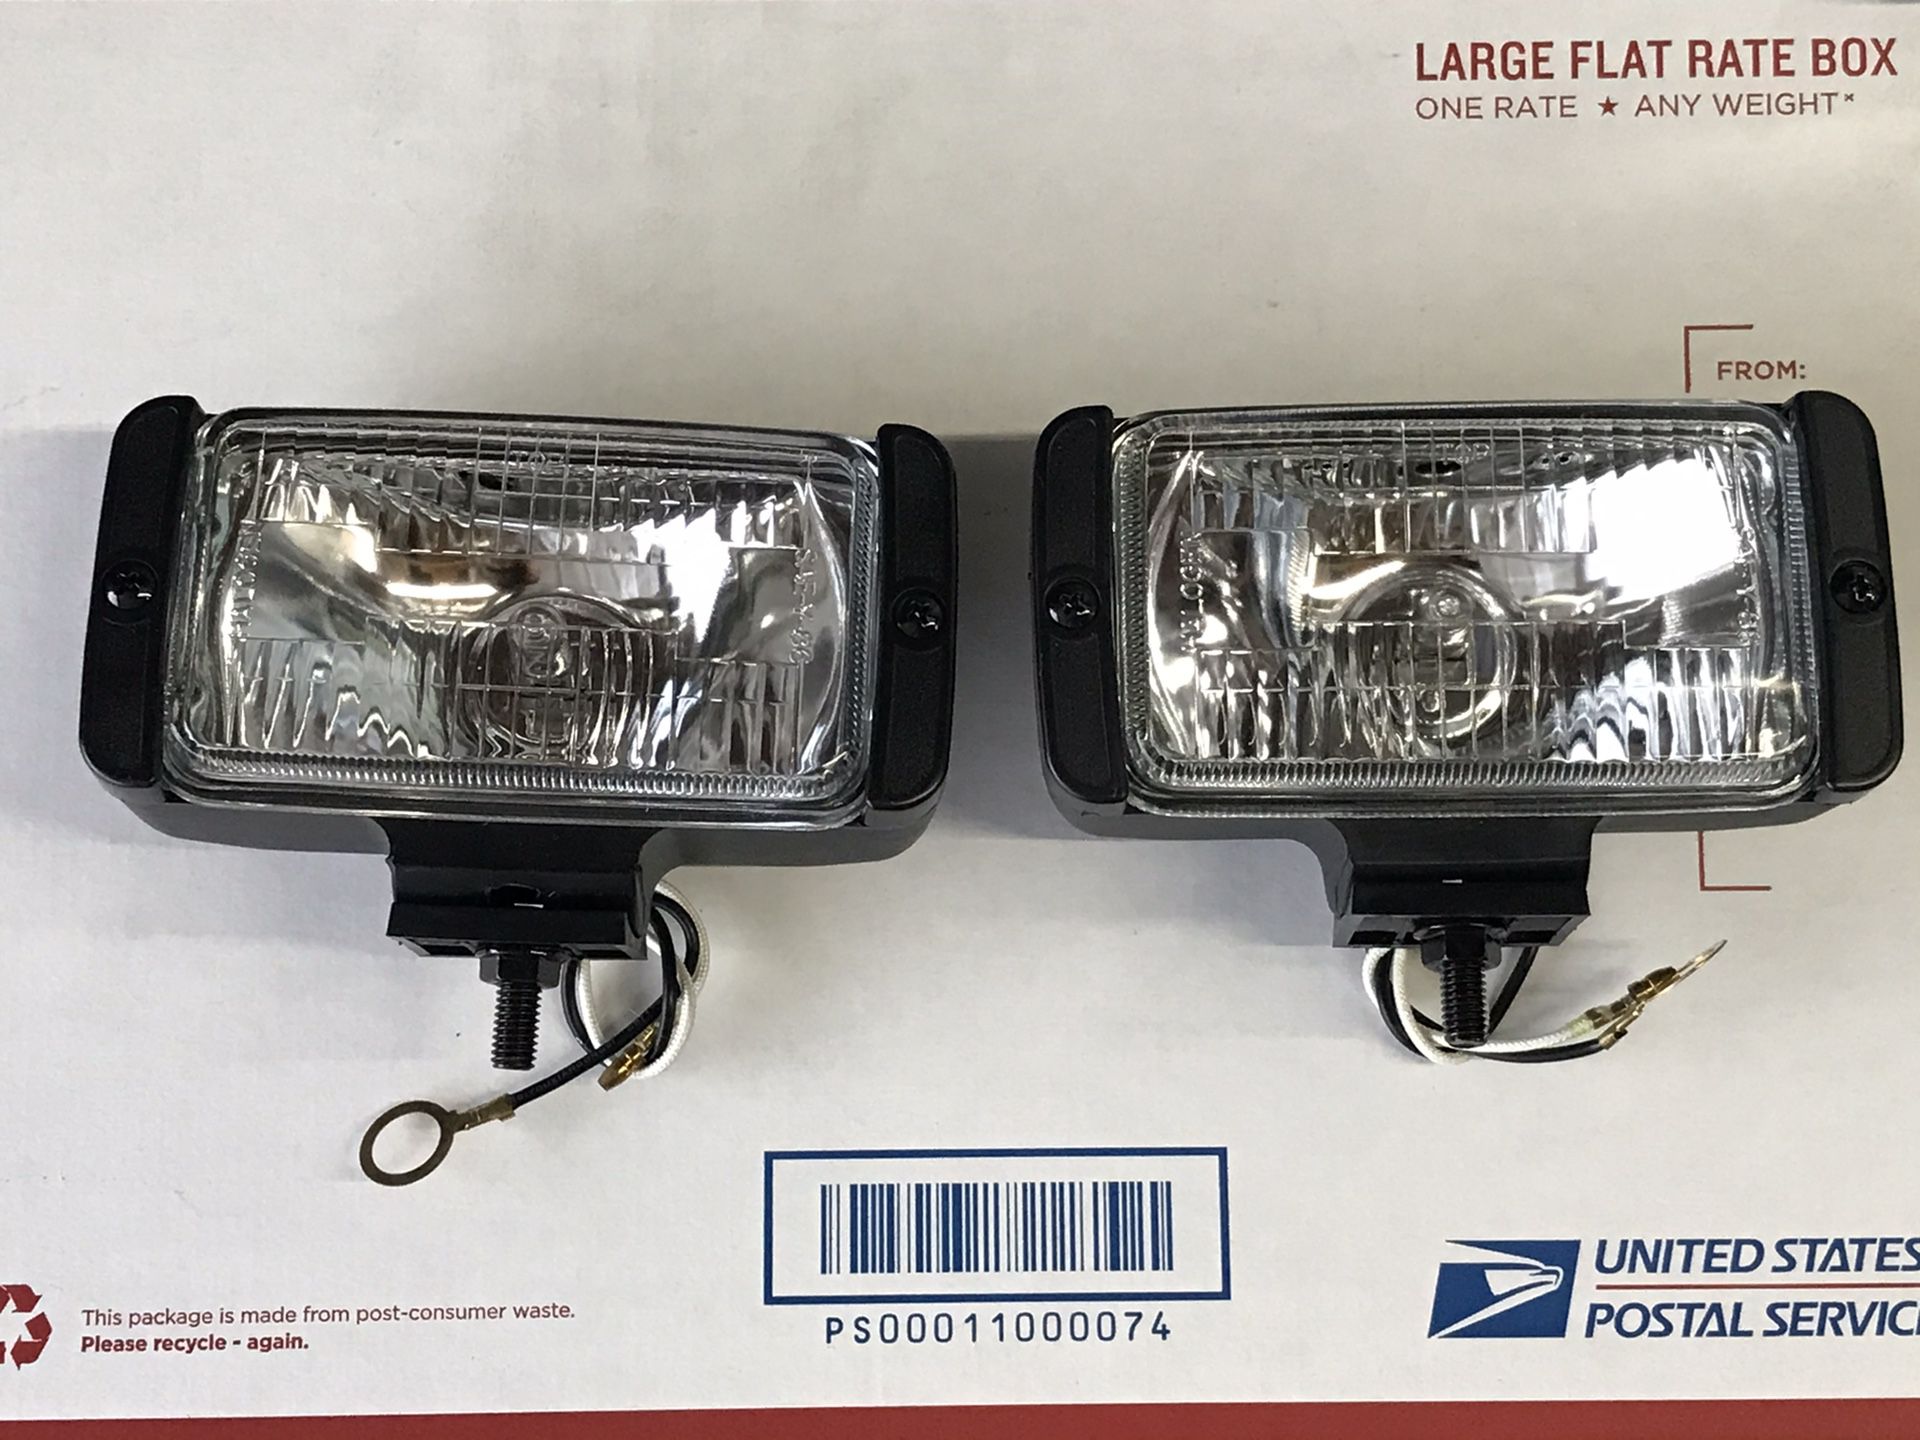 brand new 5-1/2” x 2-1/2” fog lights or back up lights as pictured